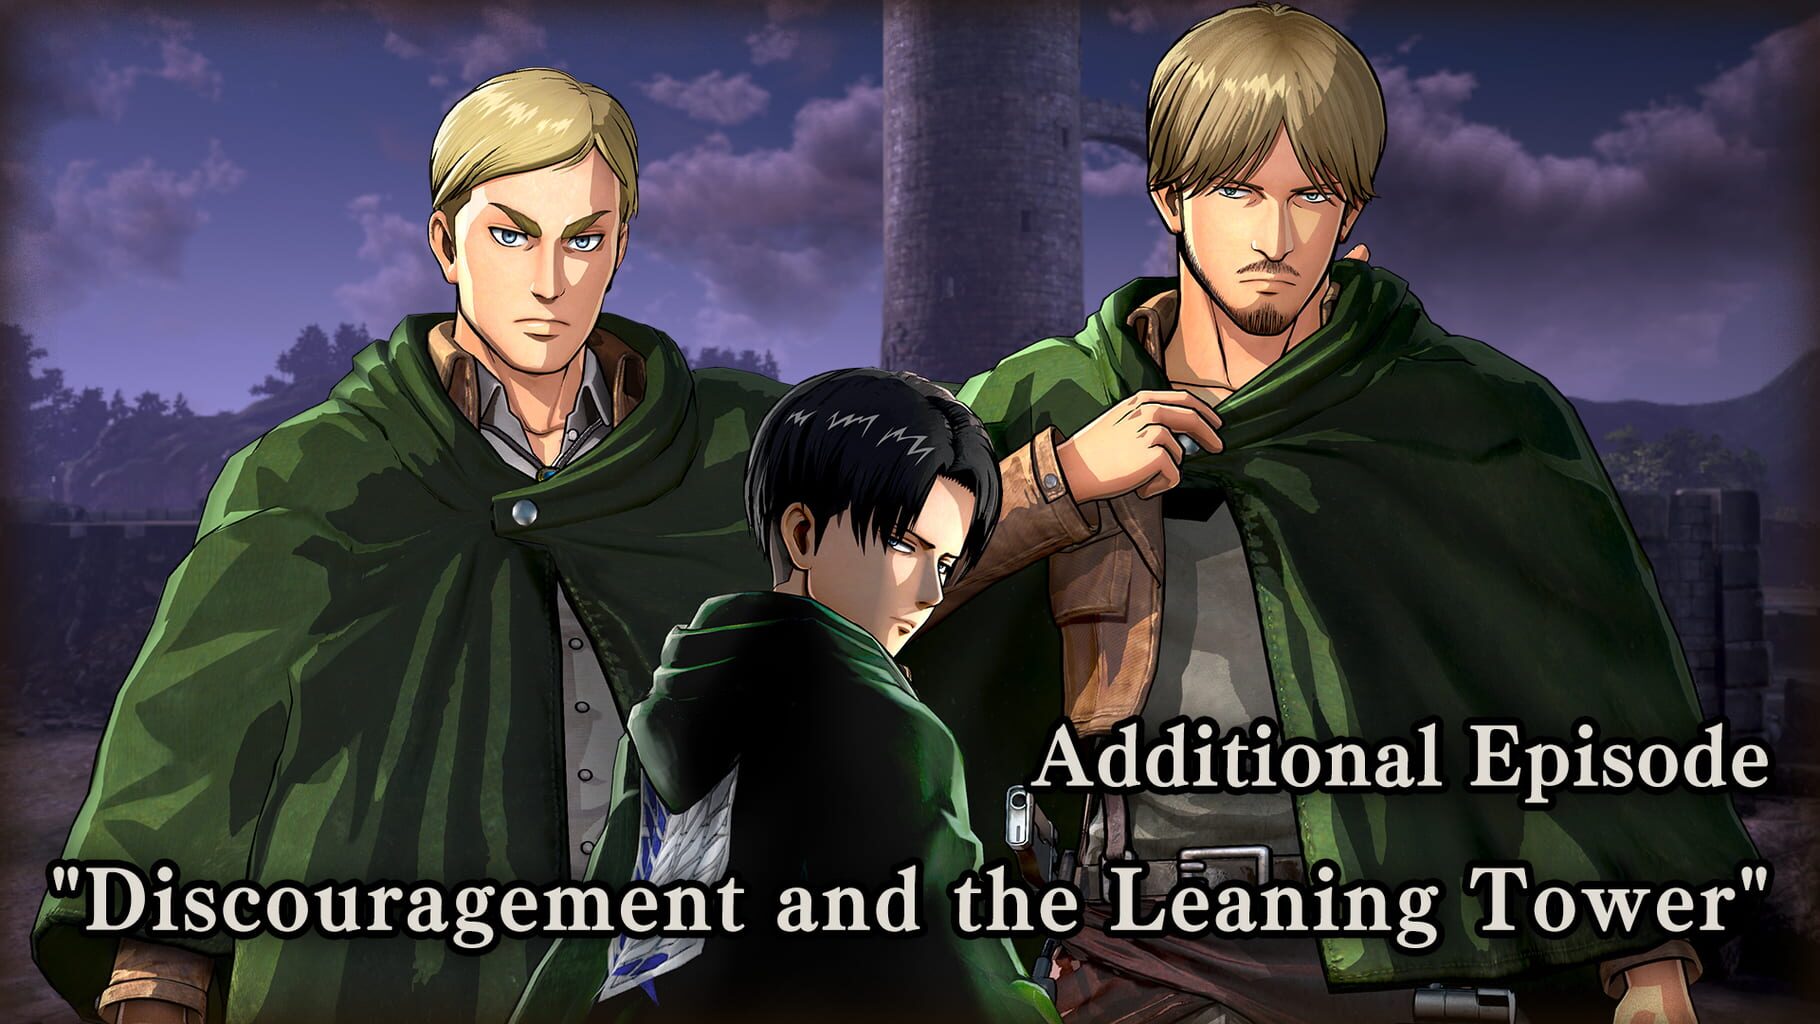 Attack on Titan 2: Discouragement and the Leaning Tower artwork